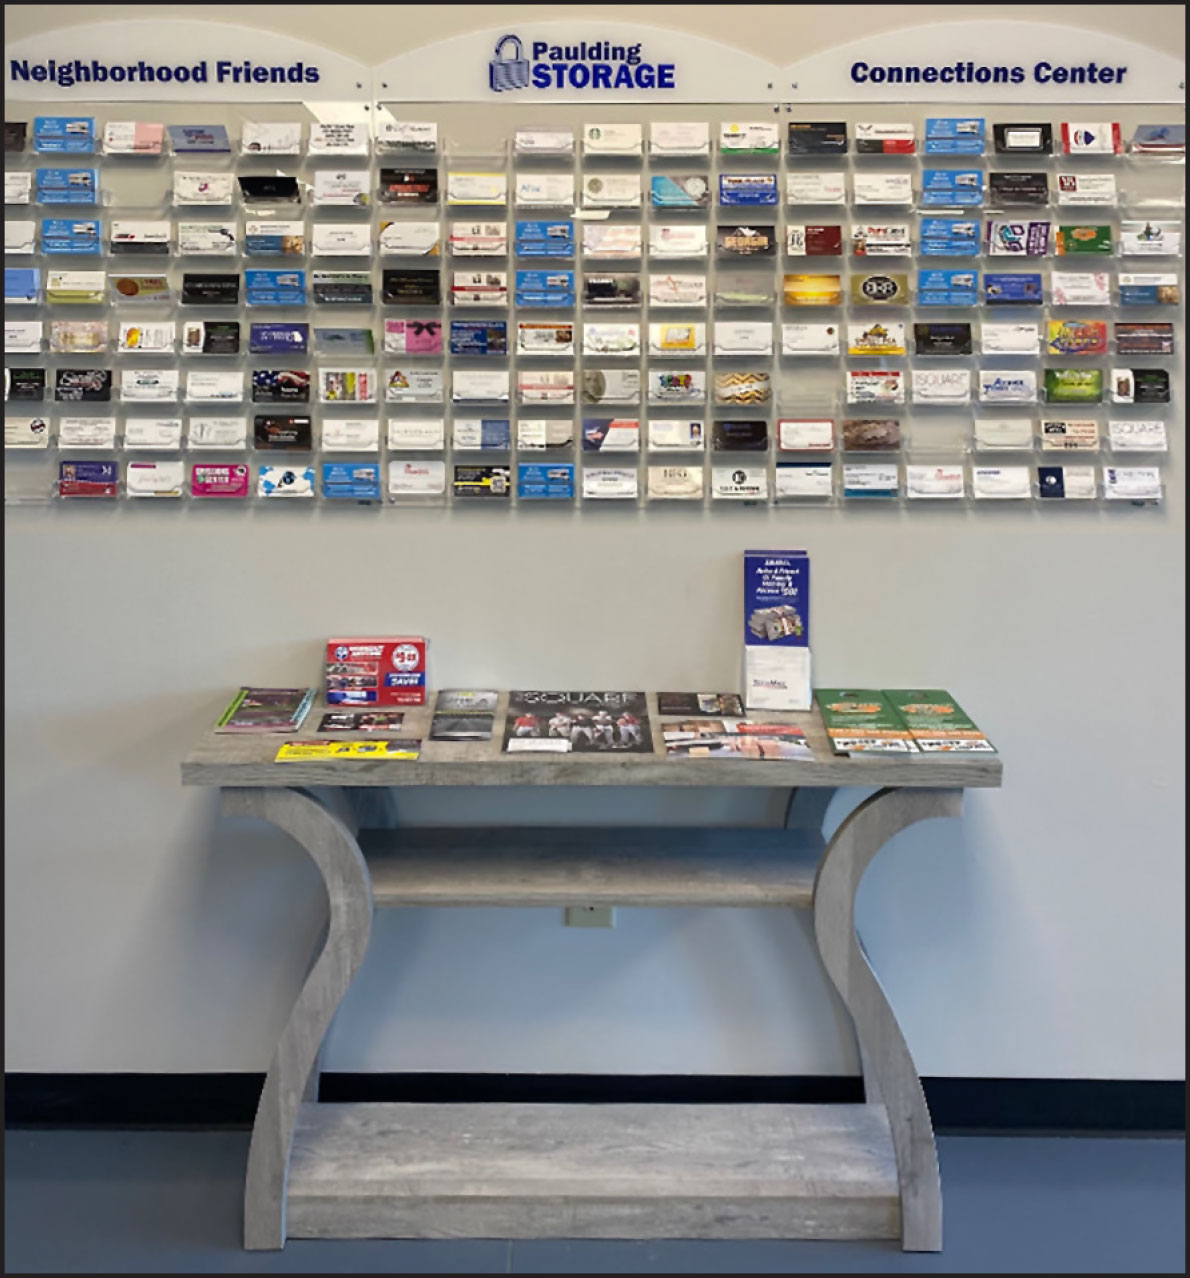 Small wooden grey table with various flyers and brochures sitting on it and shelf holding different businness cards above it